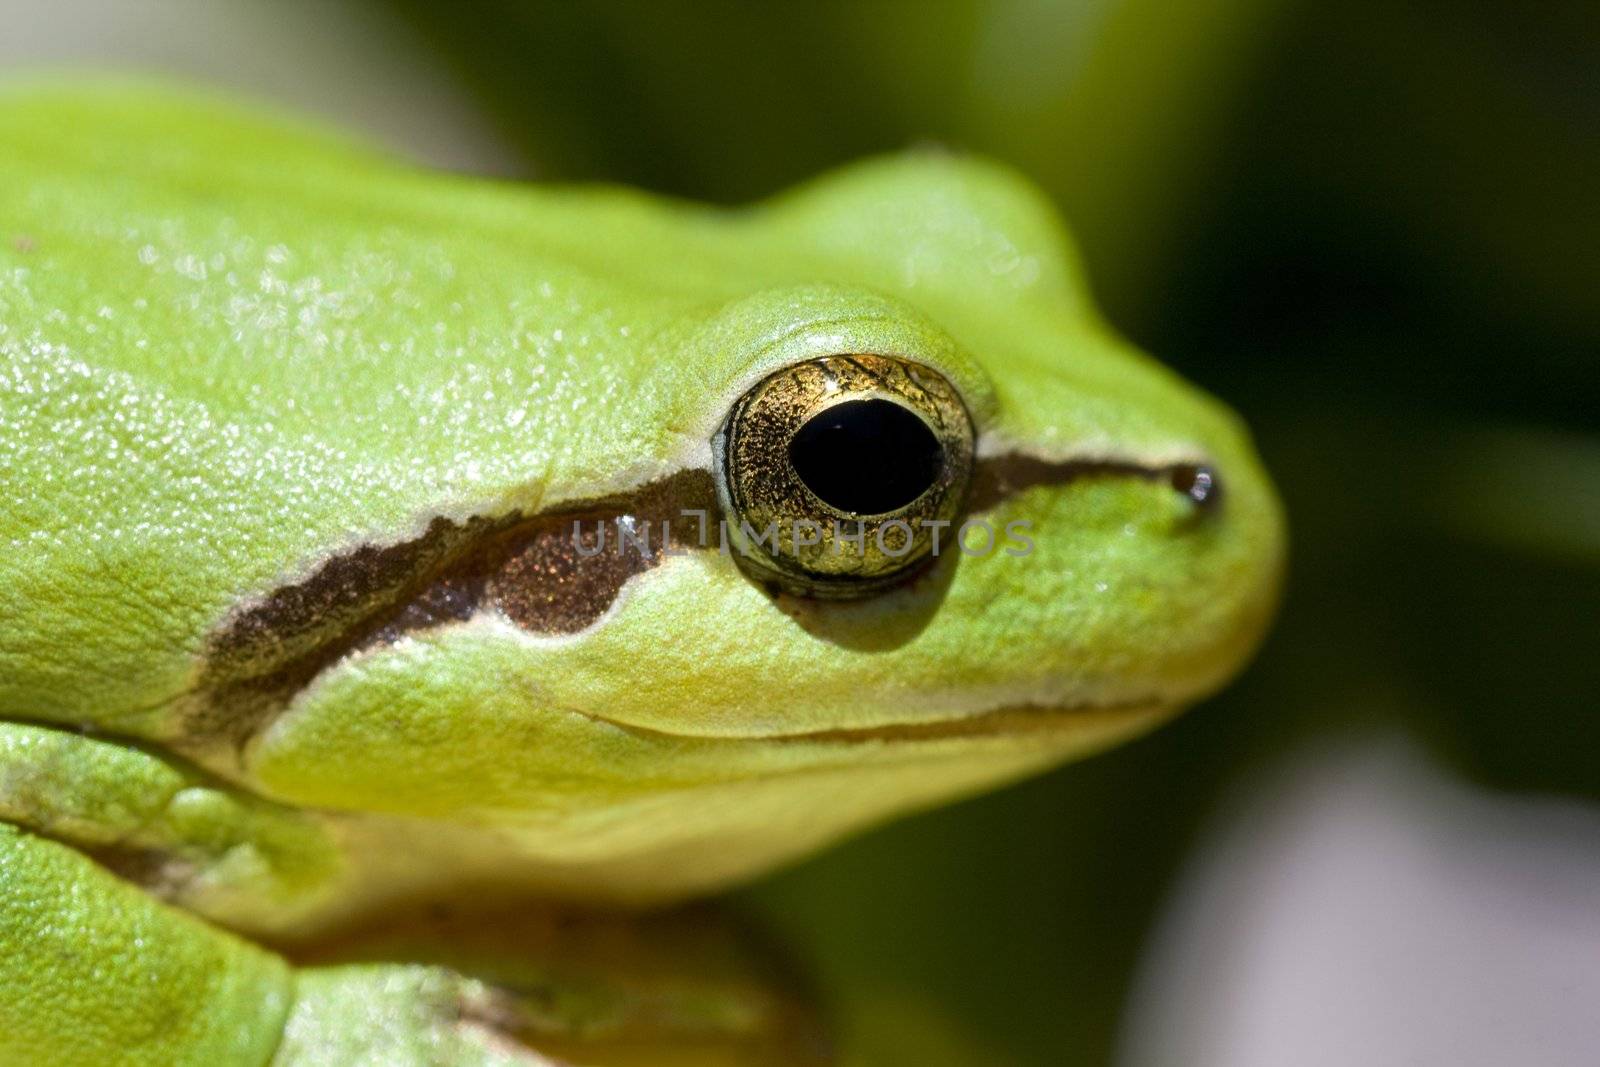 Close up view of a common green European tree frog head.